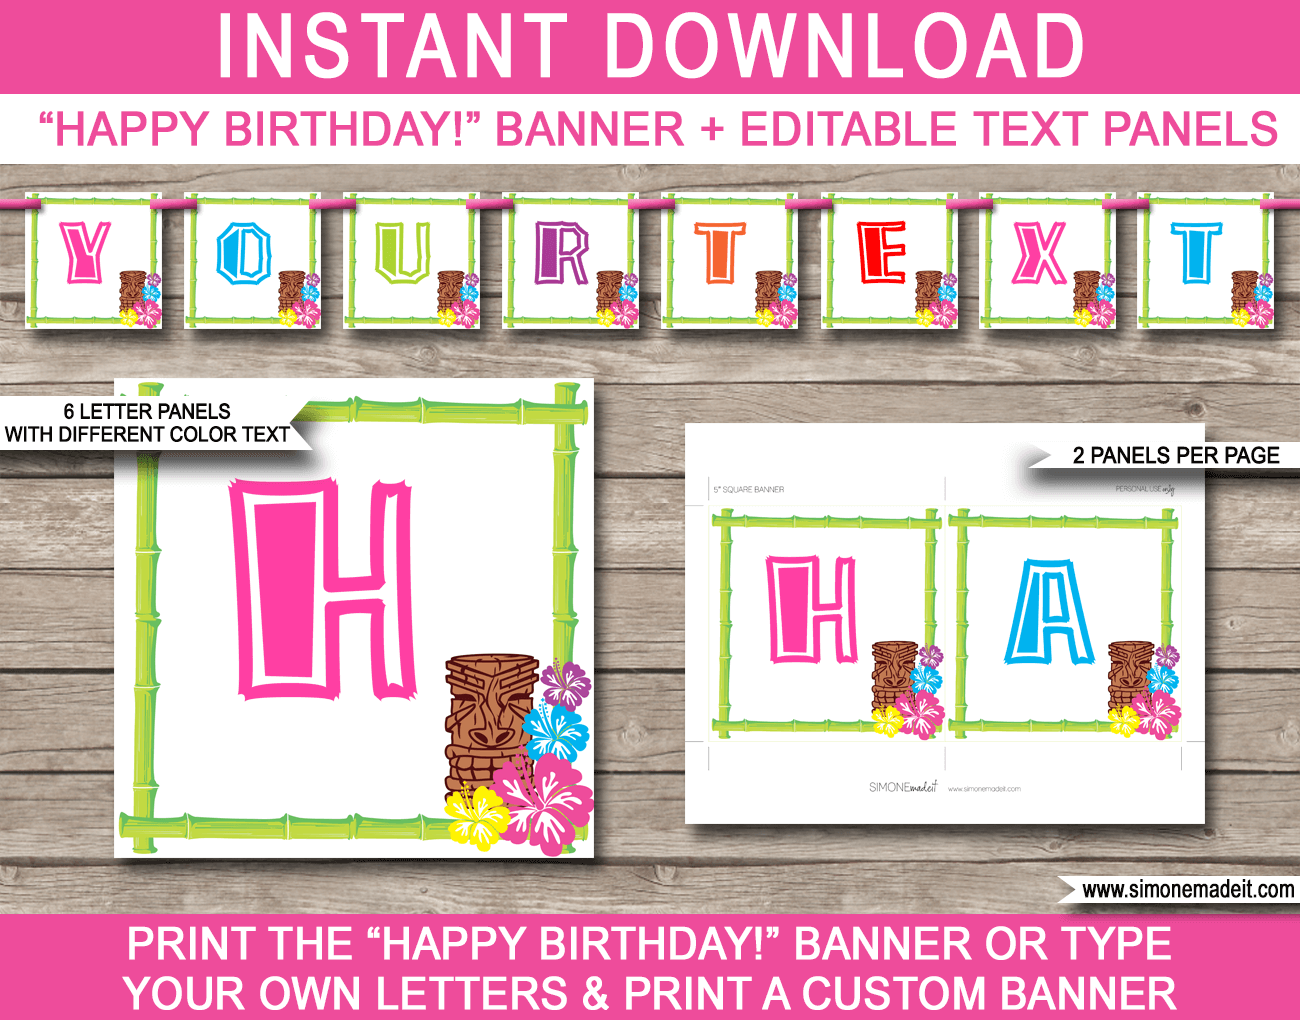 Luau Party Banner Template - Luau Bunting - Happy Birthday Banner - Birthday Party - Editable and Printable DIY Template - INSTANT DOWNLOAD $4.50 via simonemadeit.com